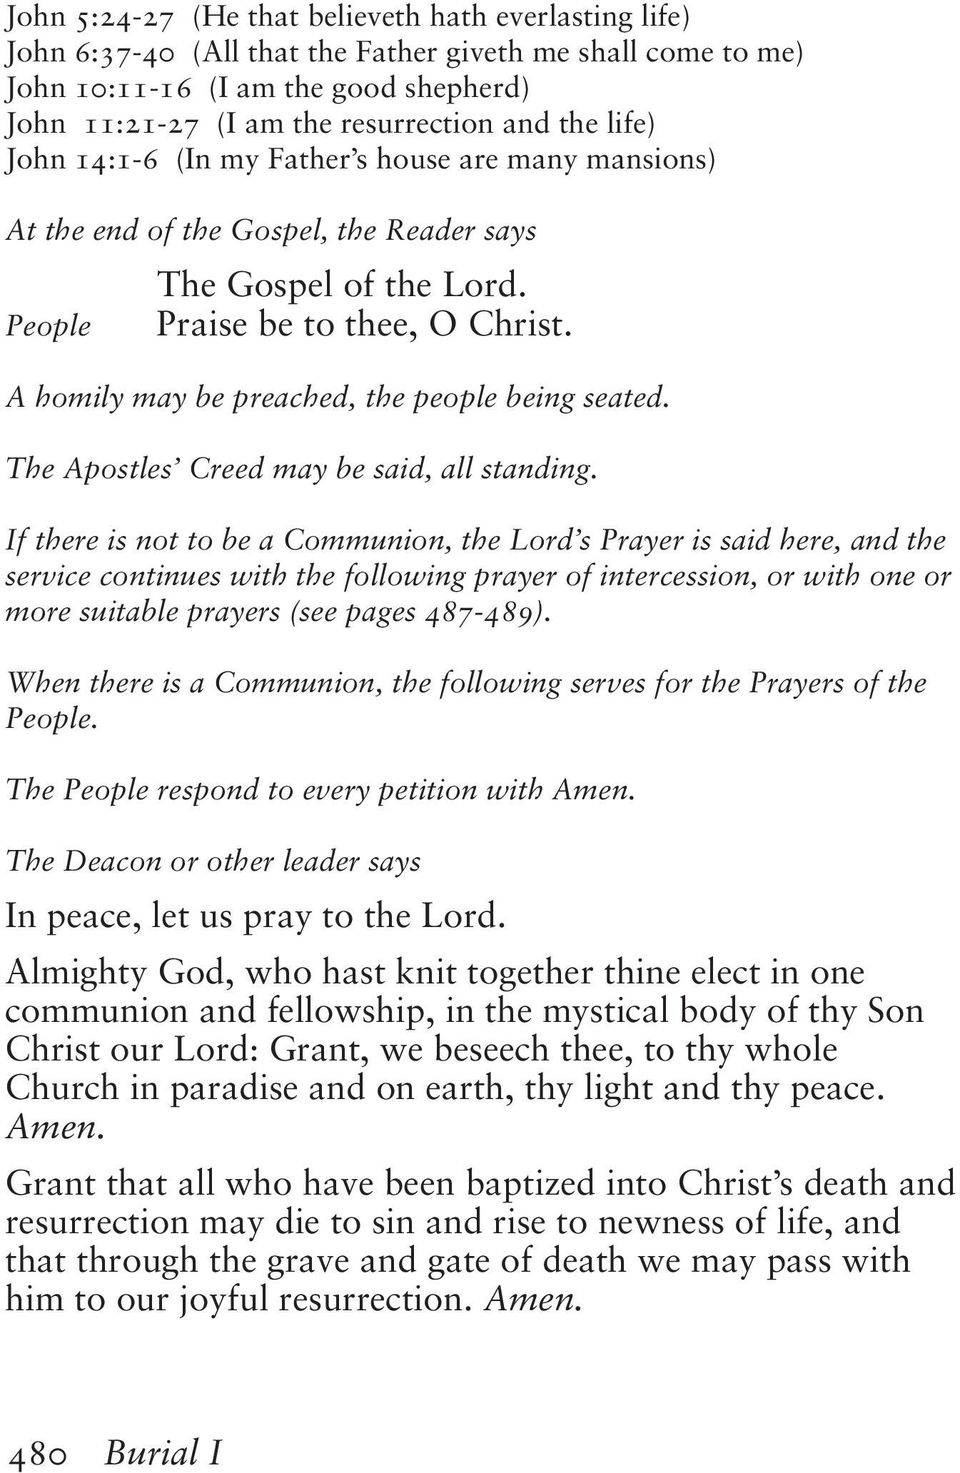 A homily may be preached, the people being seated. The Apostles Creed may be said, all standing.